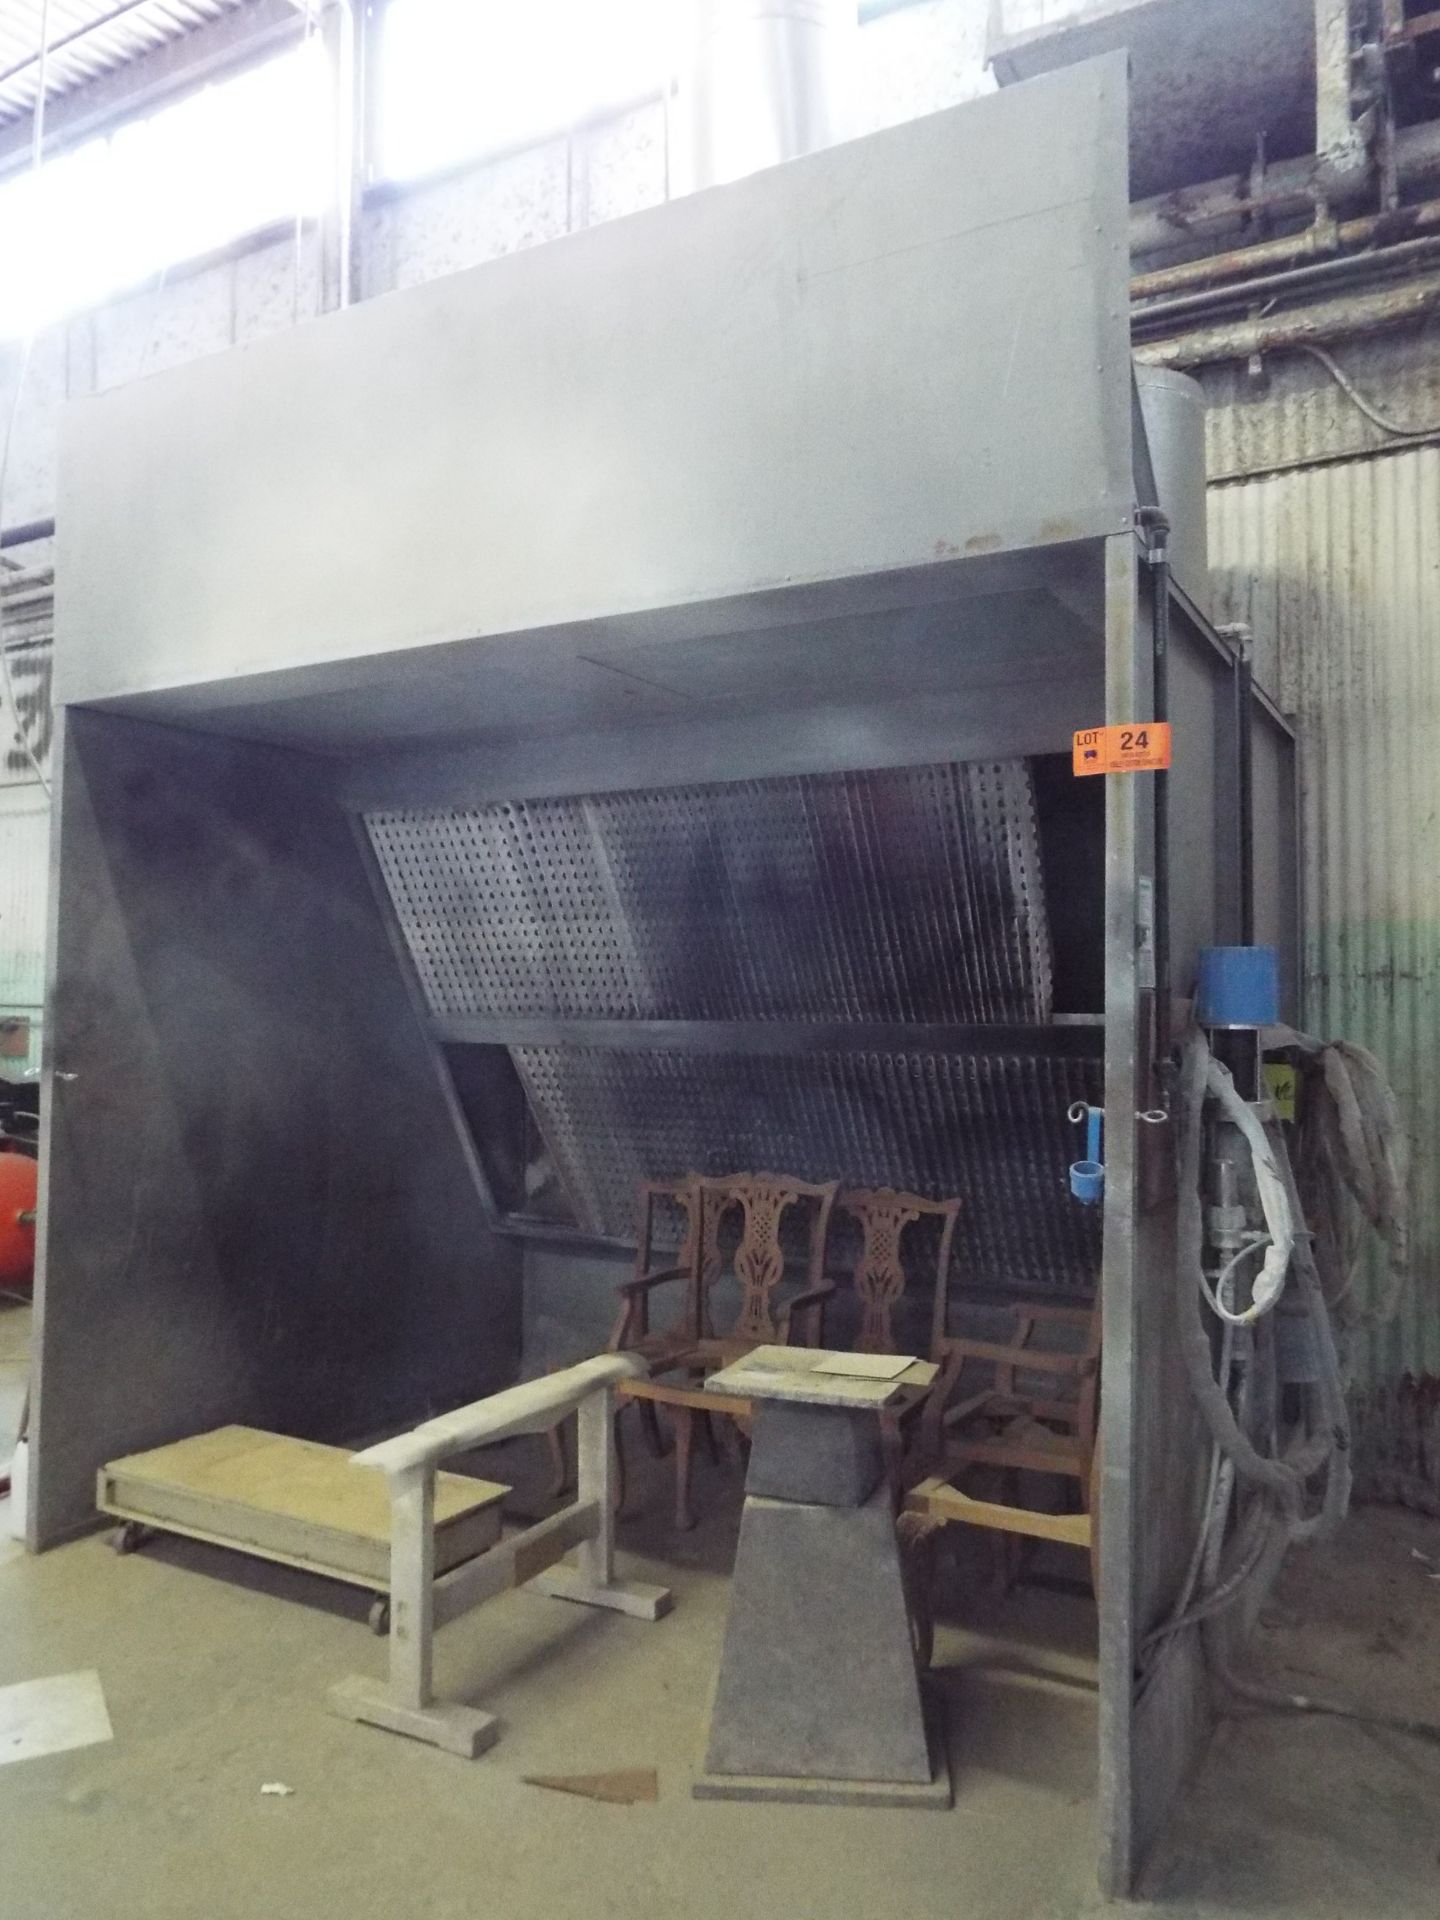 EXCEL 95"H X 117"W X 84"D OPEN SIDE PAINT BOOTH WITH LIGHT, VENTILATION AND FILTERS, KREMLIN